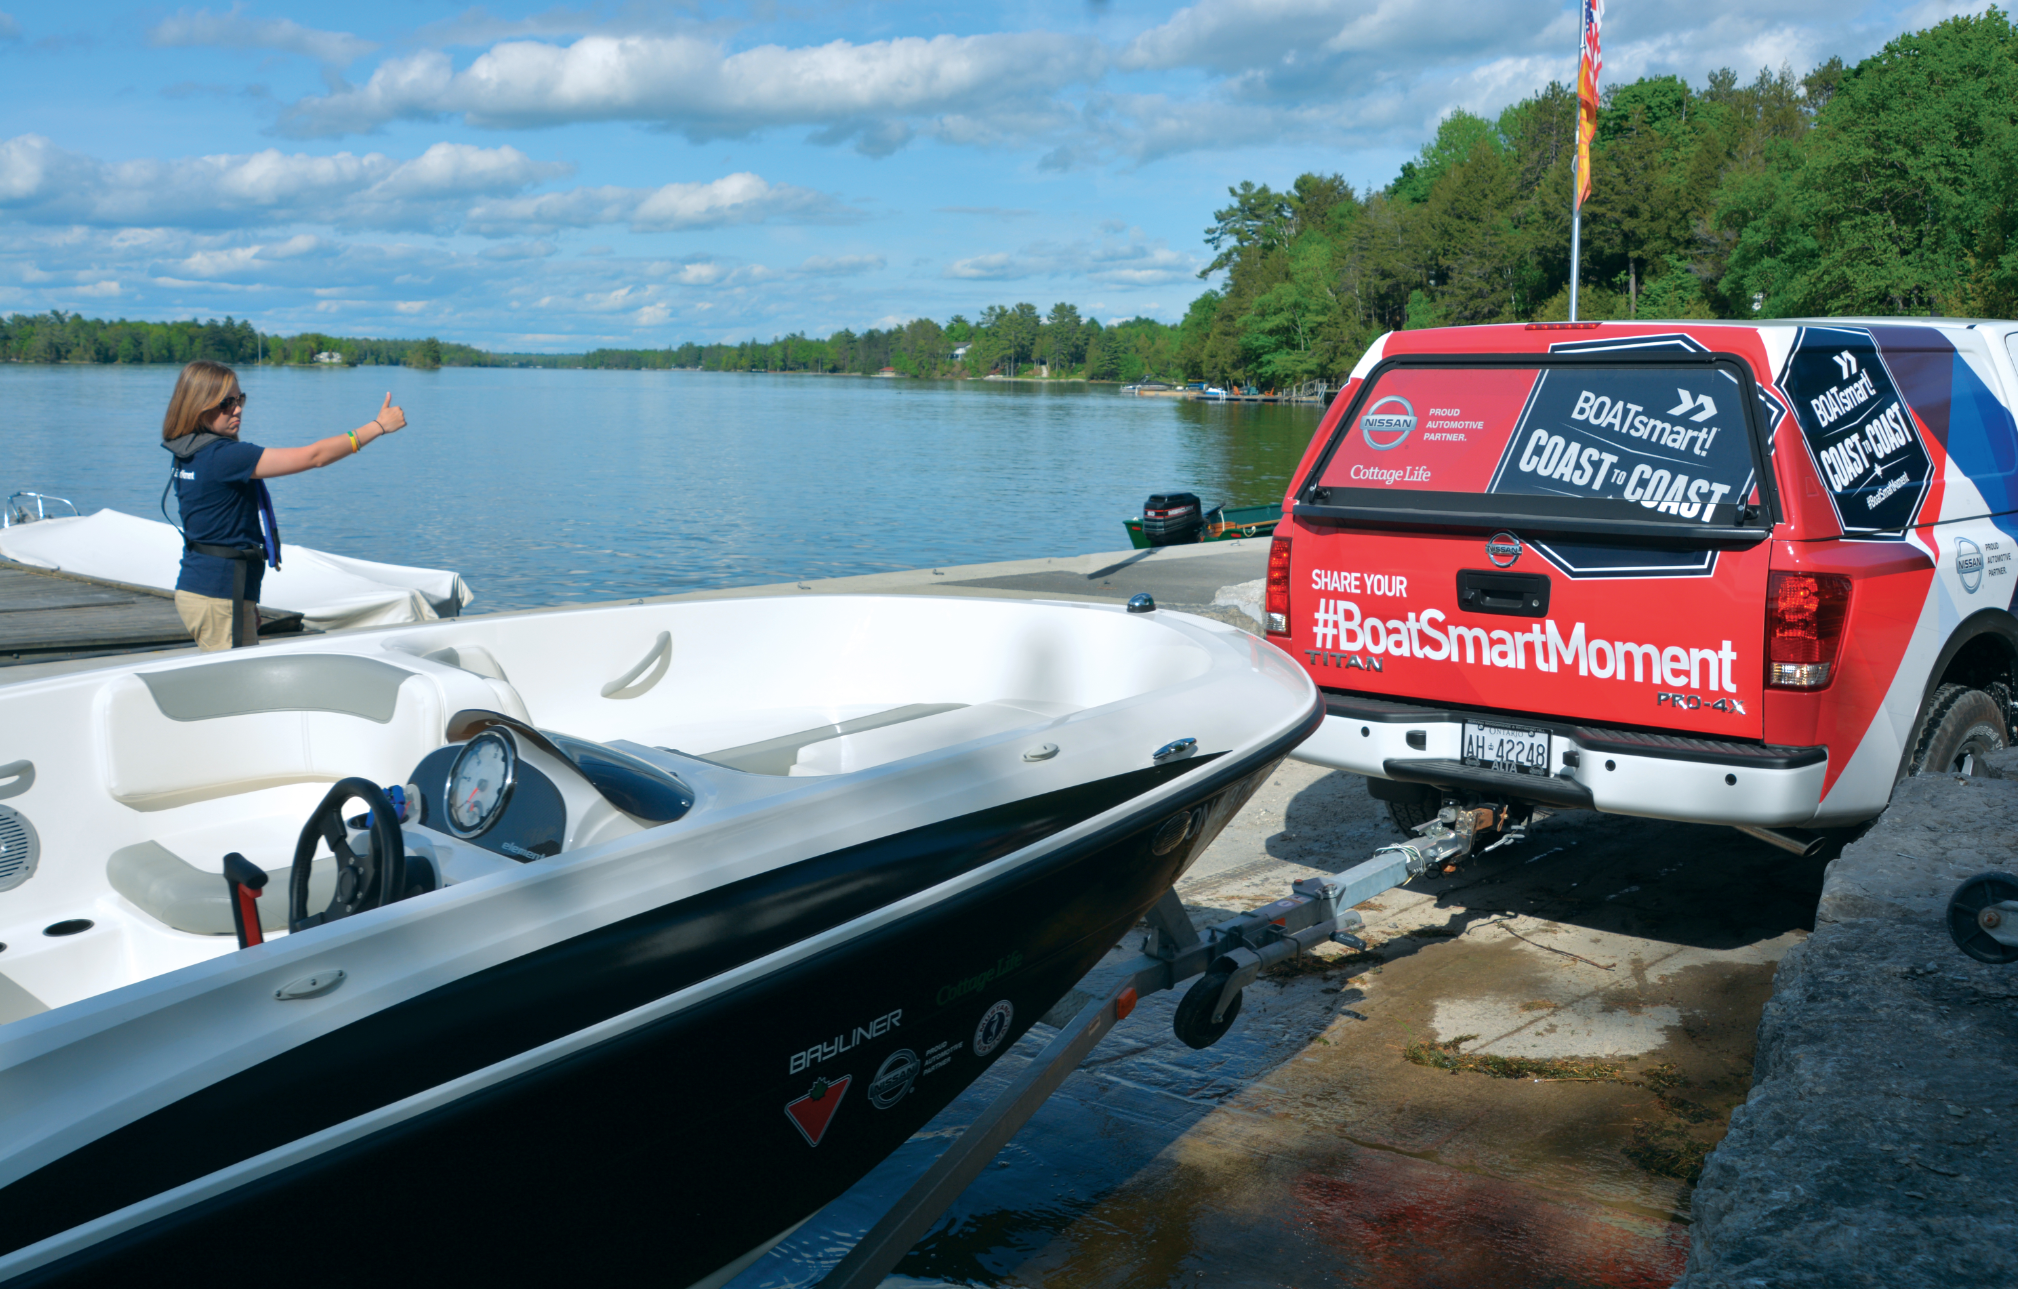 How To Launch A Boat: 10 Steps to Get on the Water